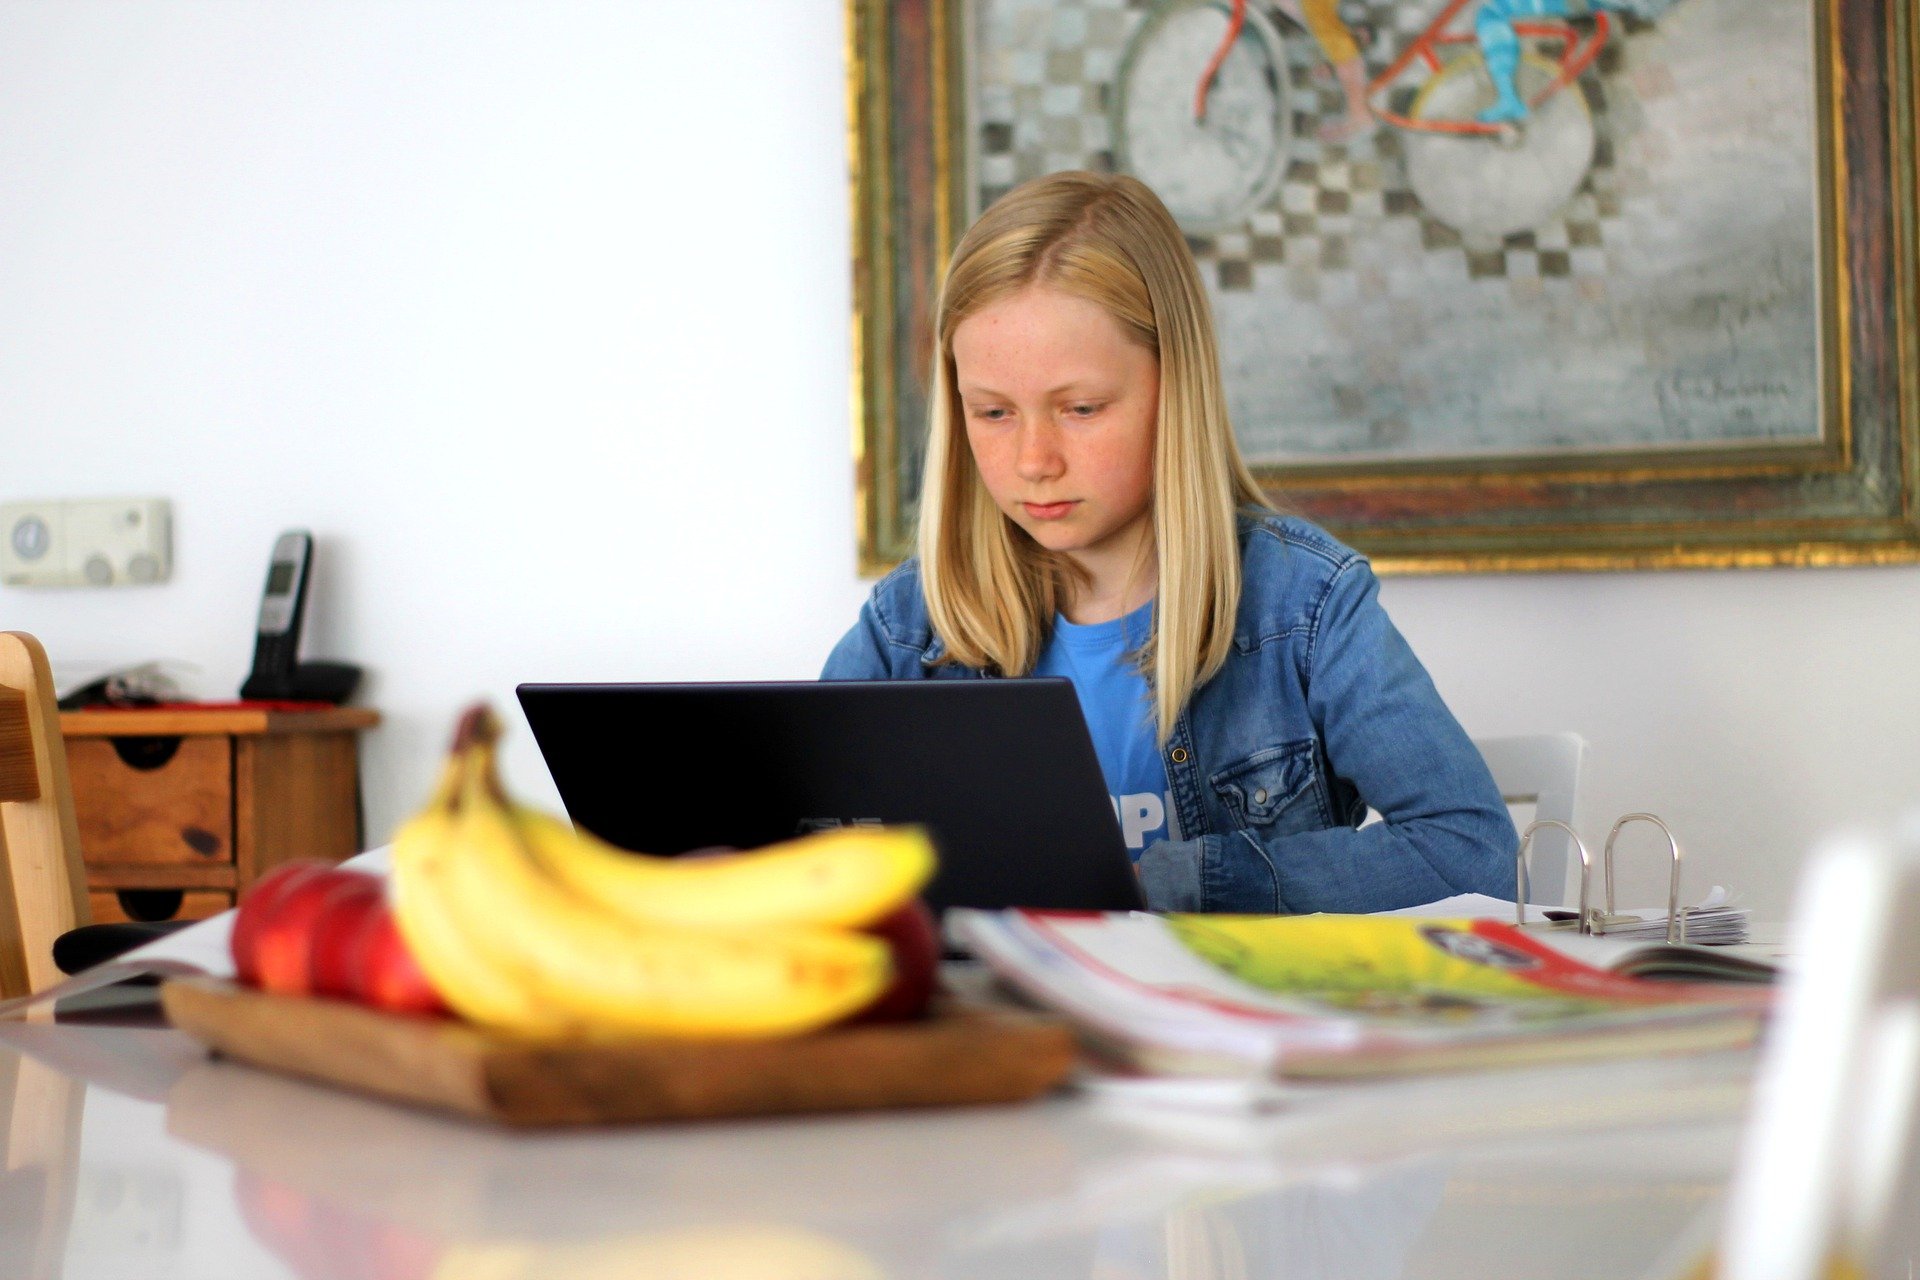 Young girl at kitchen table with open laptop